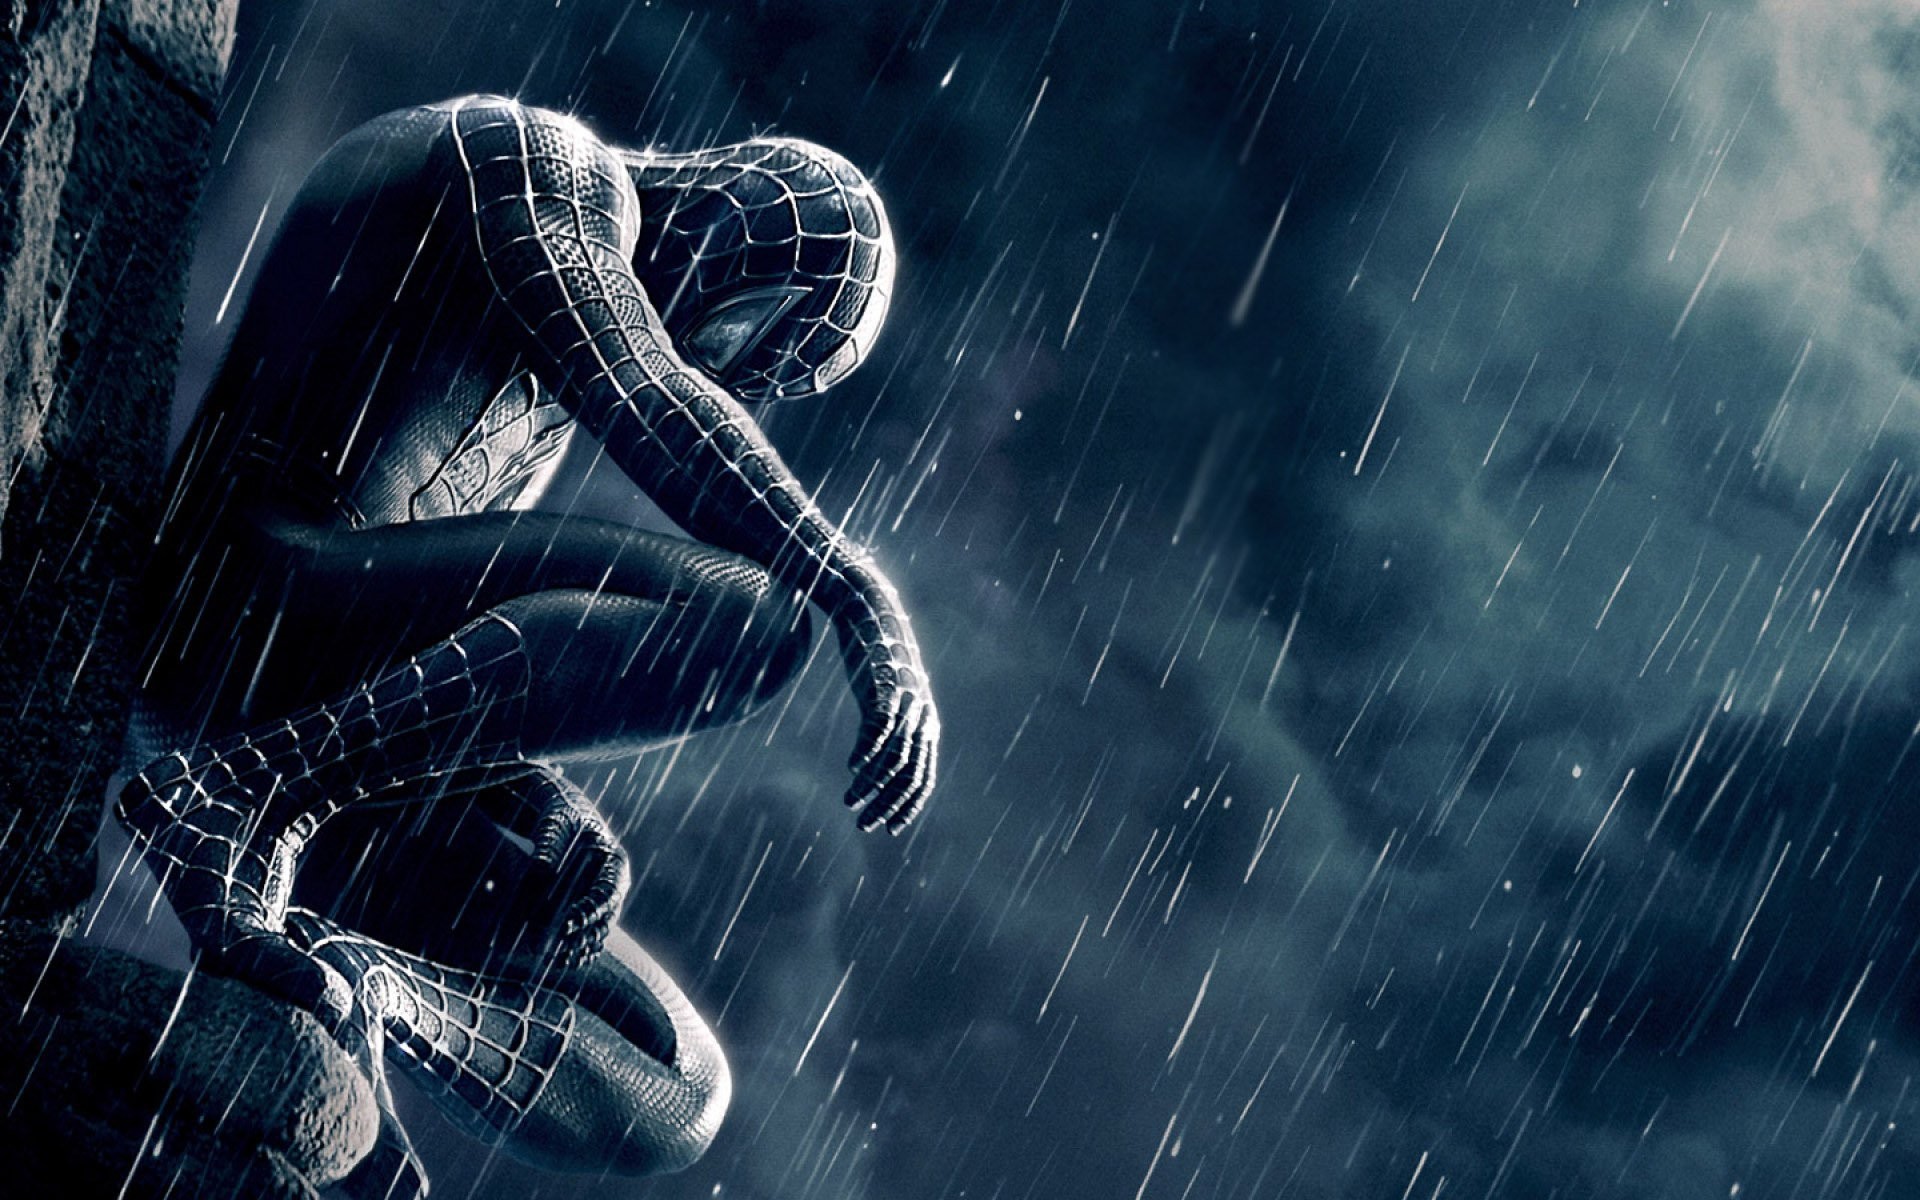  Spiderman  wallpaper  HD    Download free HD  wallpapers  for 